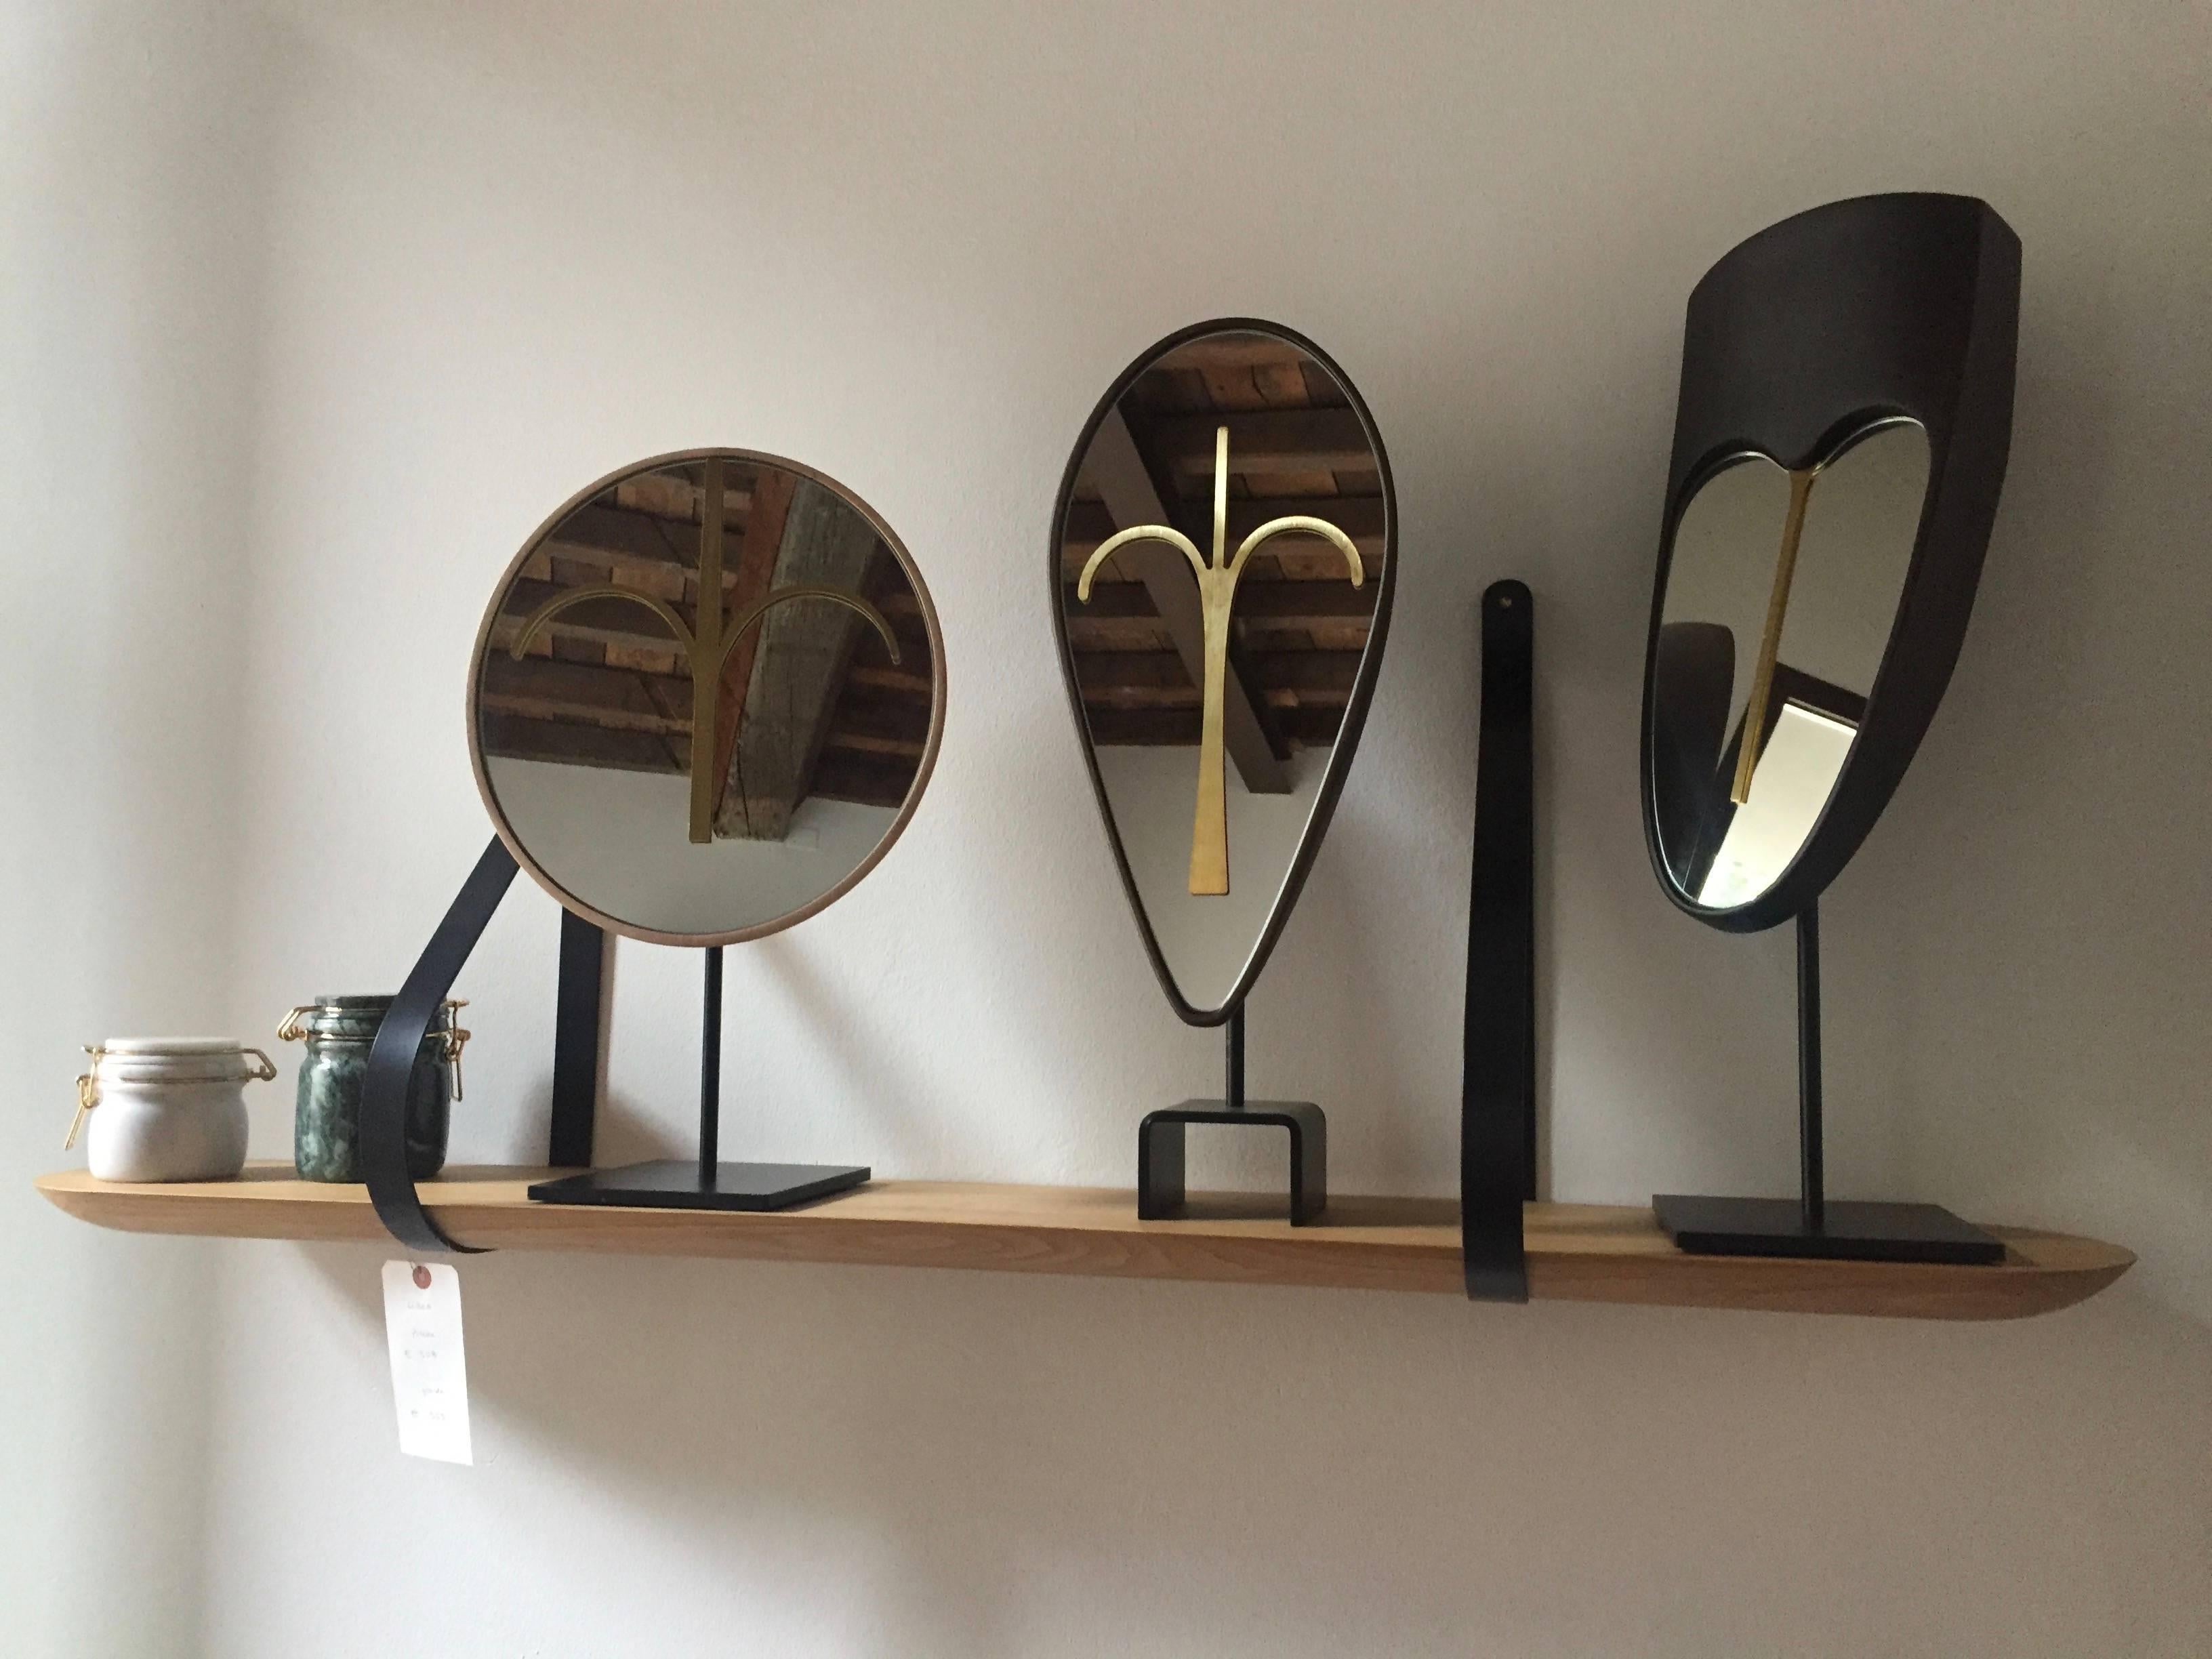 Libra Shelf 120, Minimalist Round Shaped Wall Shelf in oak and black metal  In New Condition For Sale In Milan, Lombardy